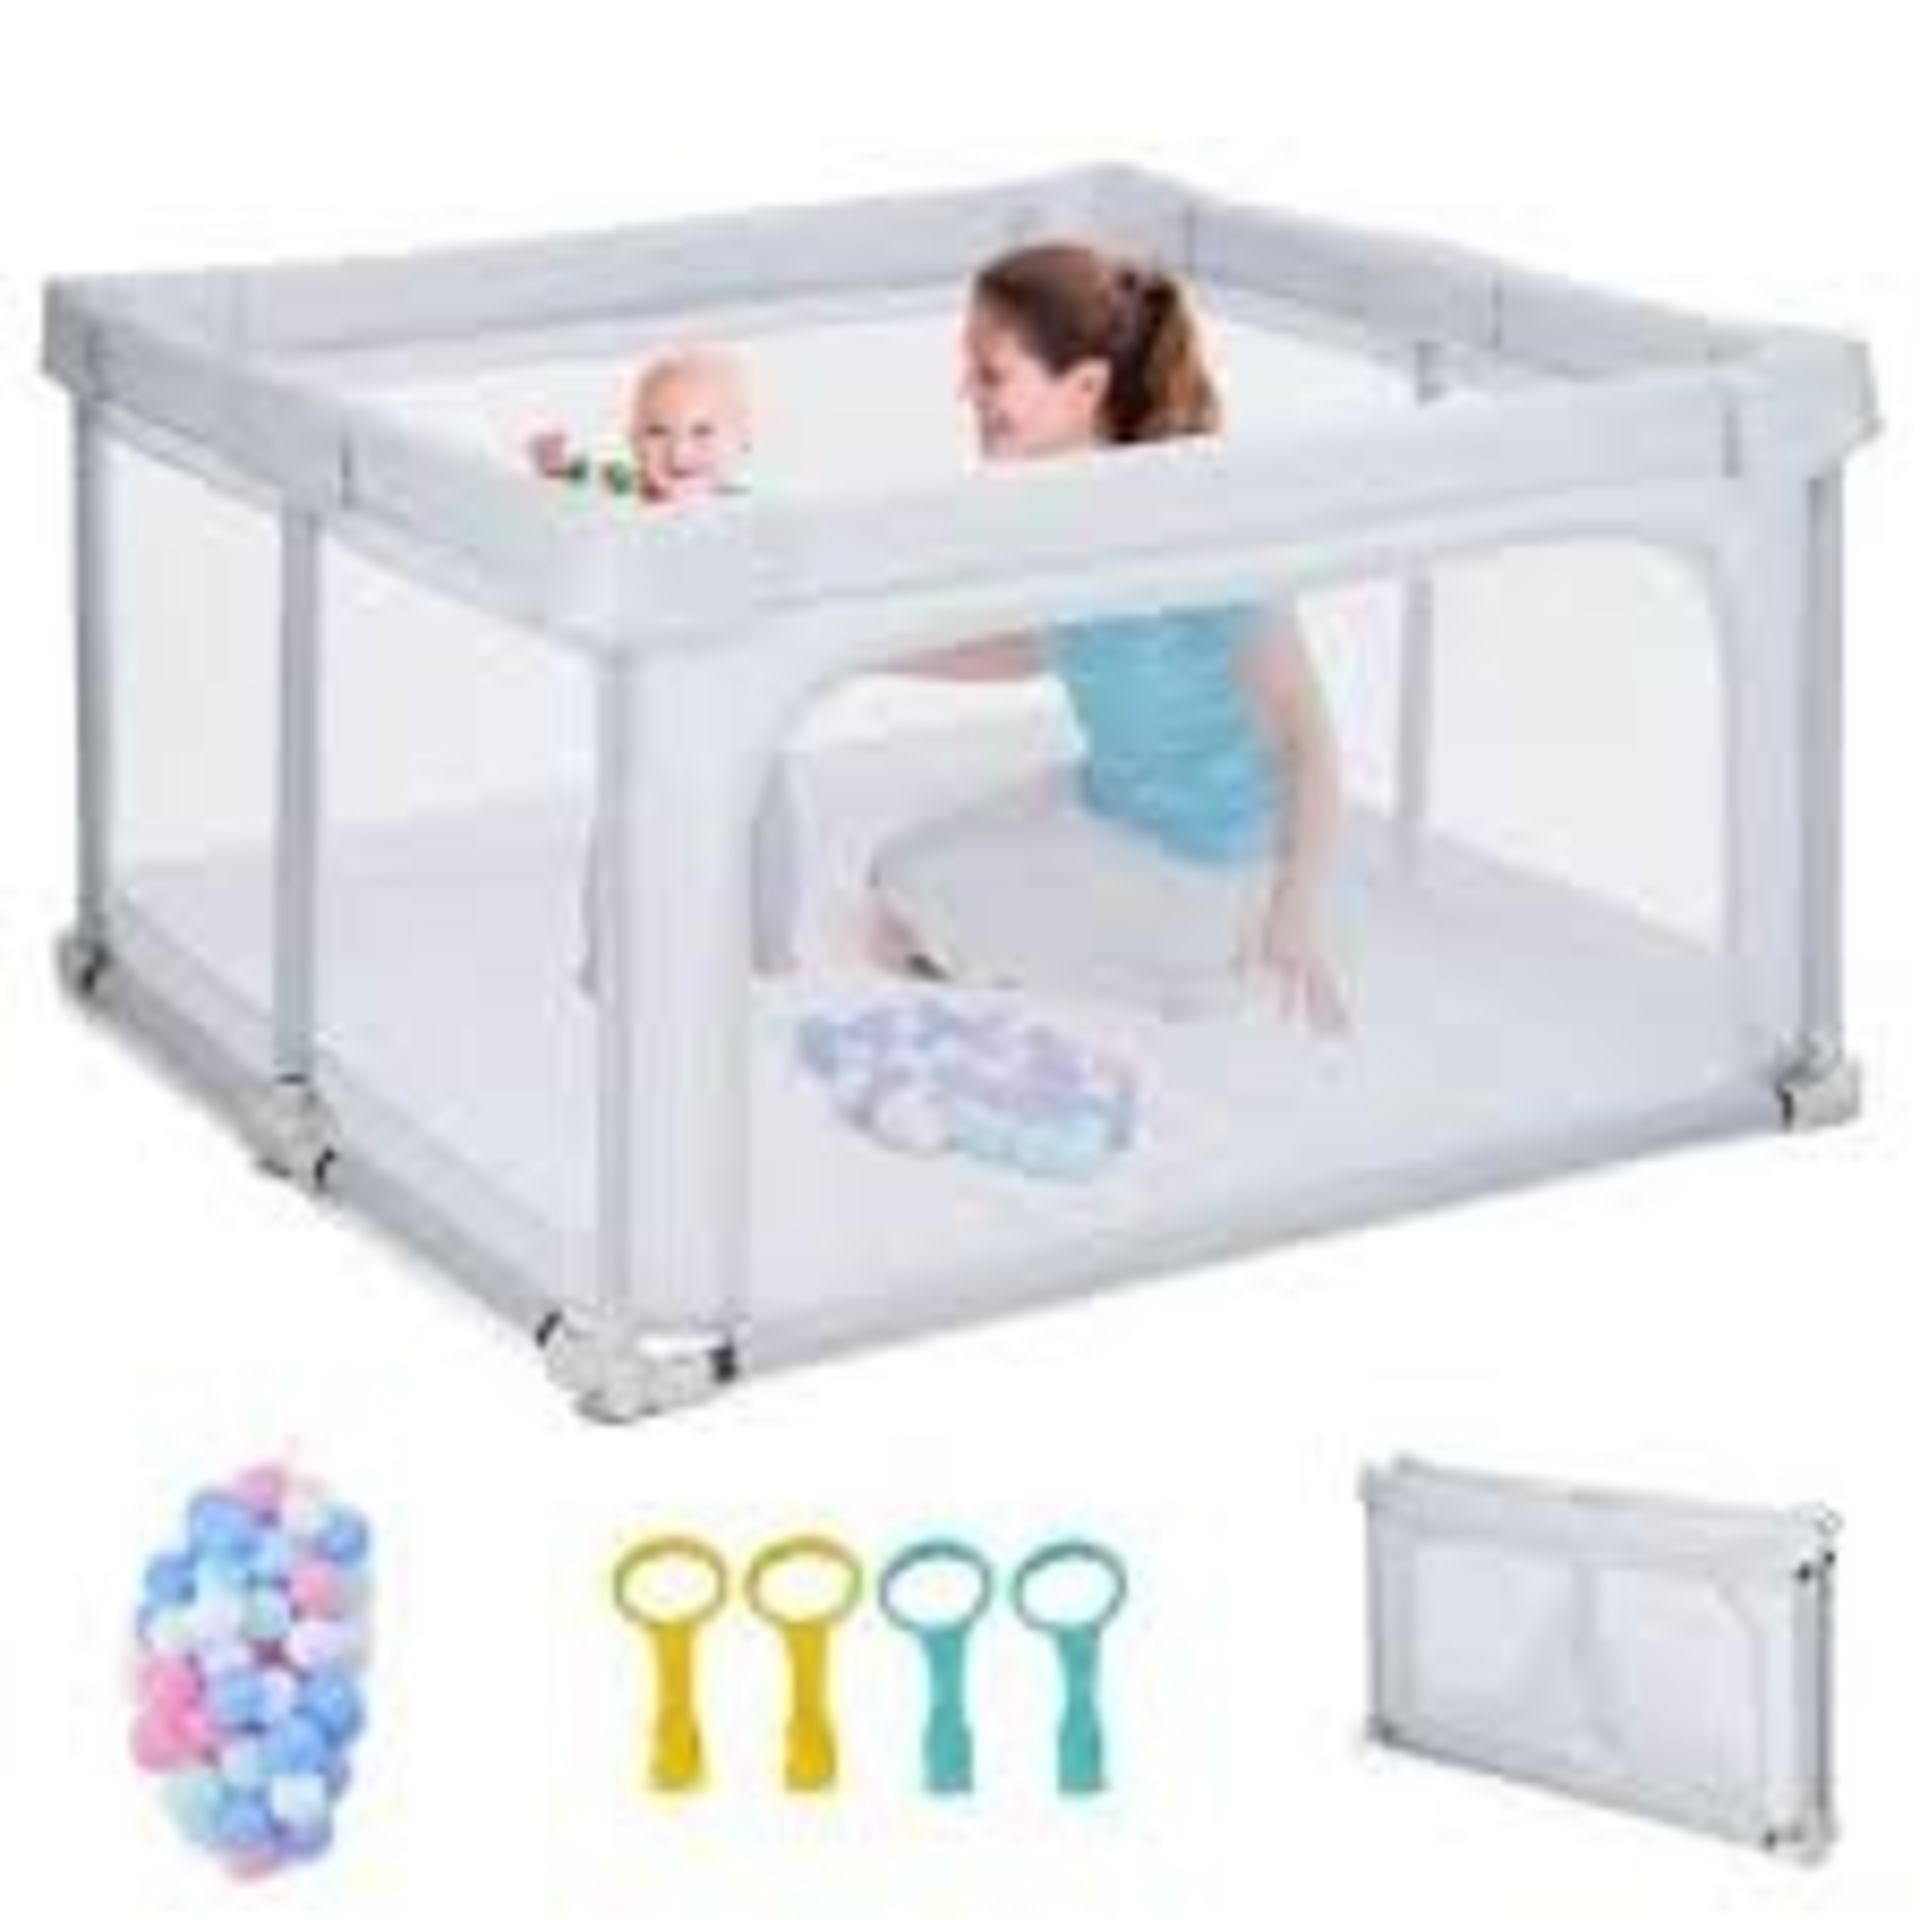 124cm Foldable Baby Playpen Interactive Activity Center with Balls Pull Rings - ER54